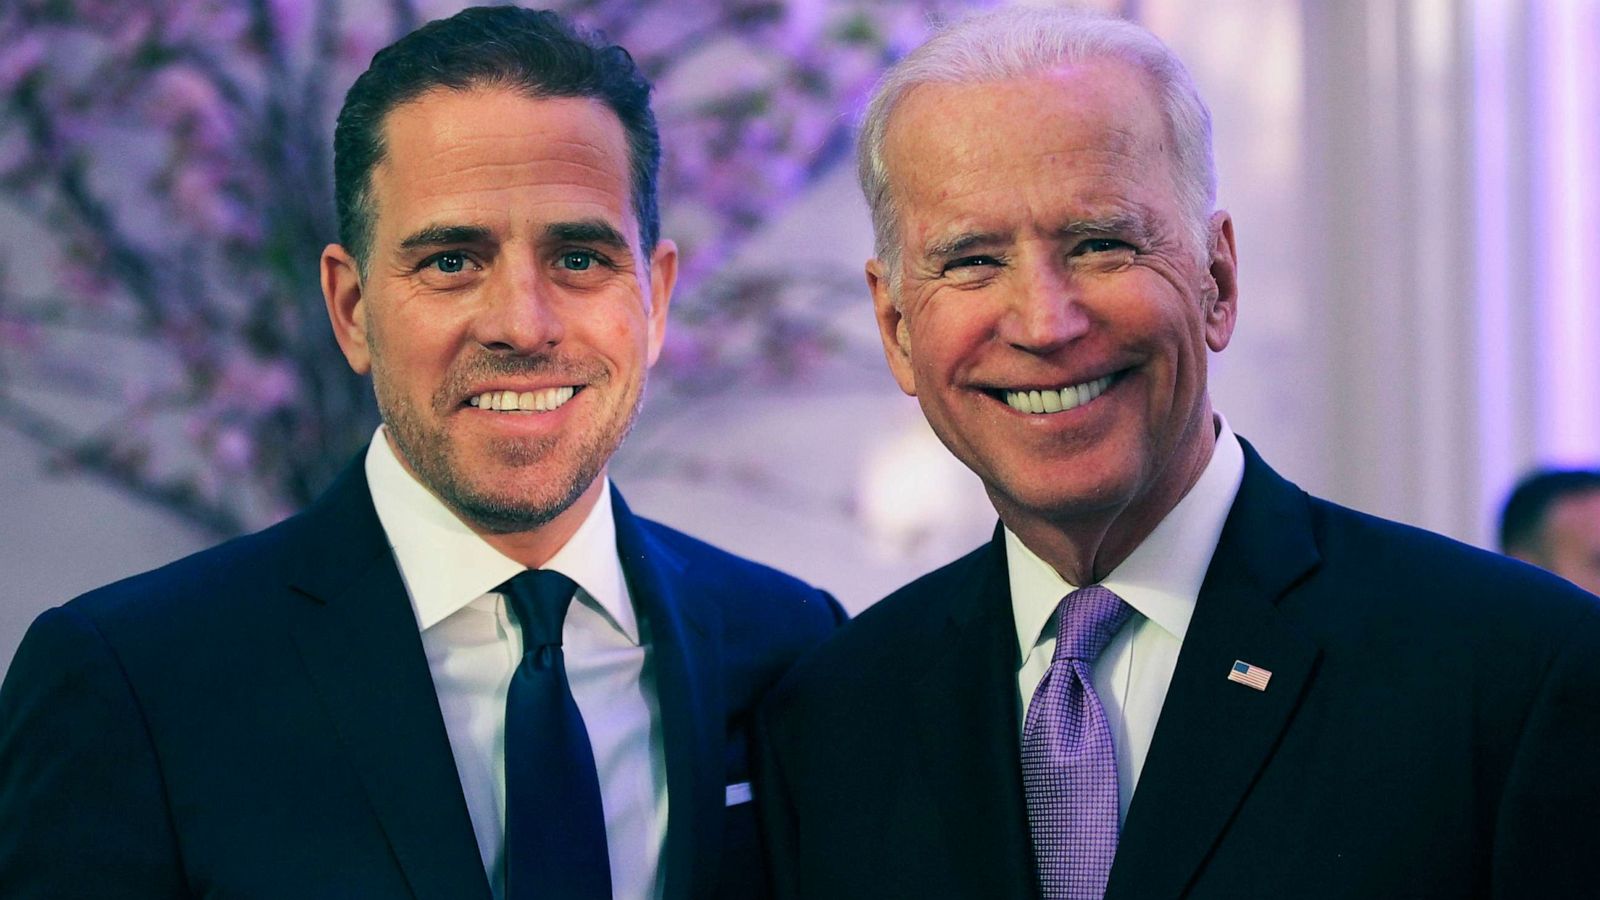 Did Tapper Just Confirm Trump’s ‘Truth’ About Hunter Biden?